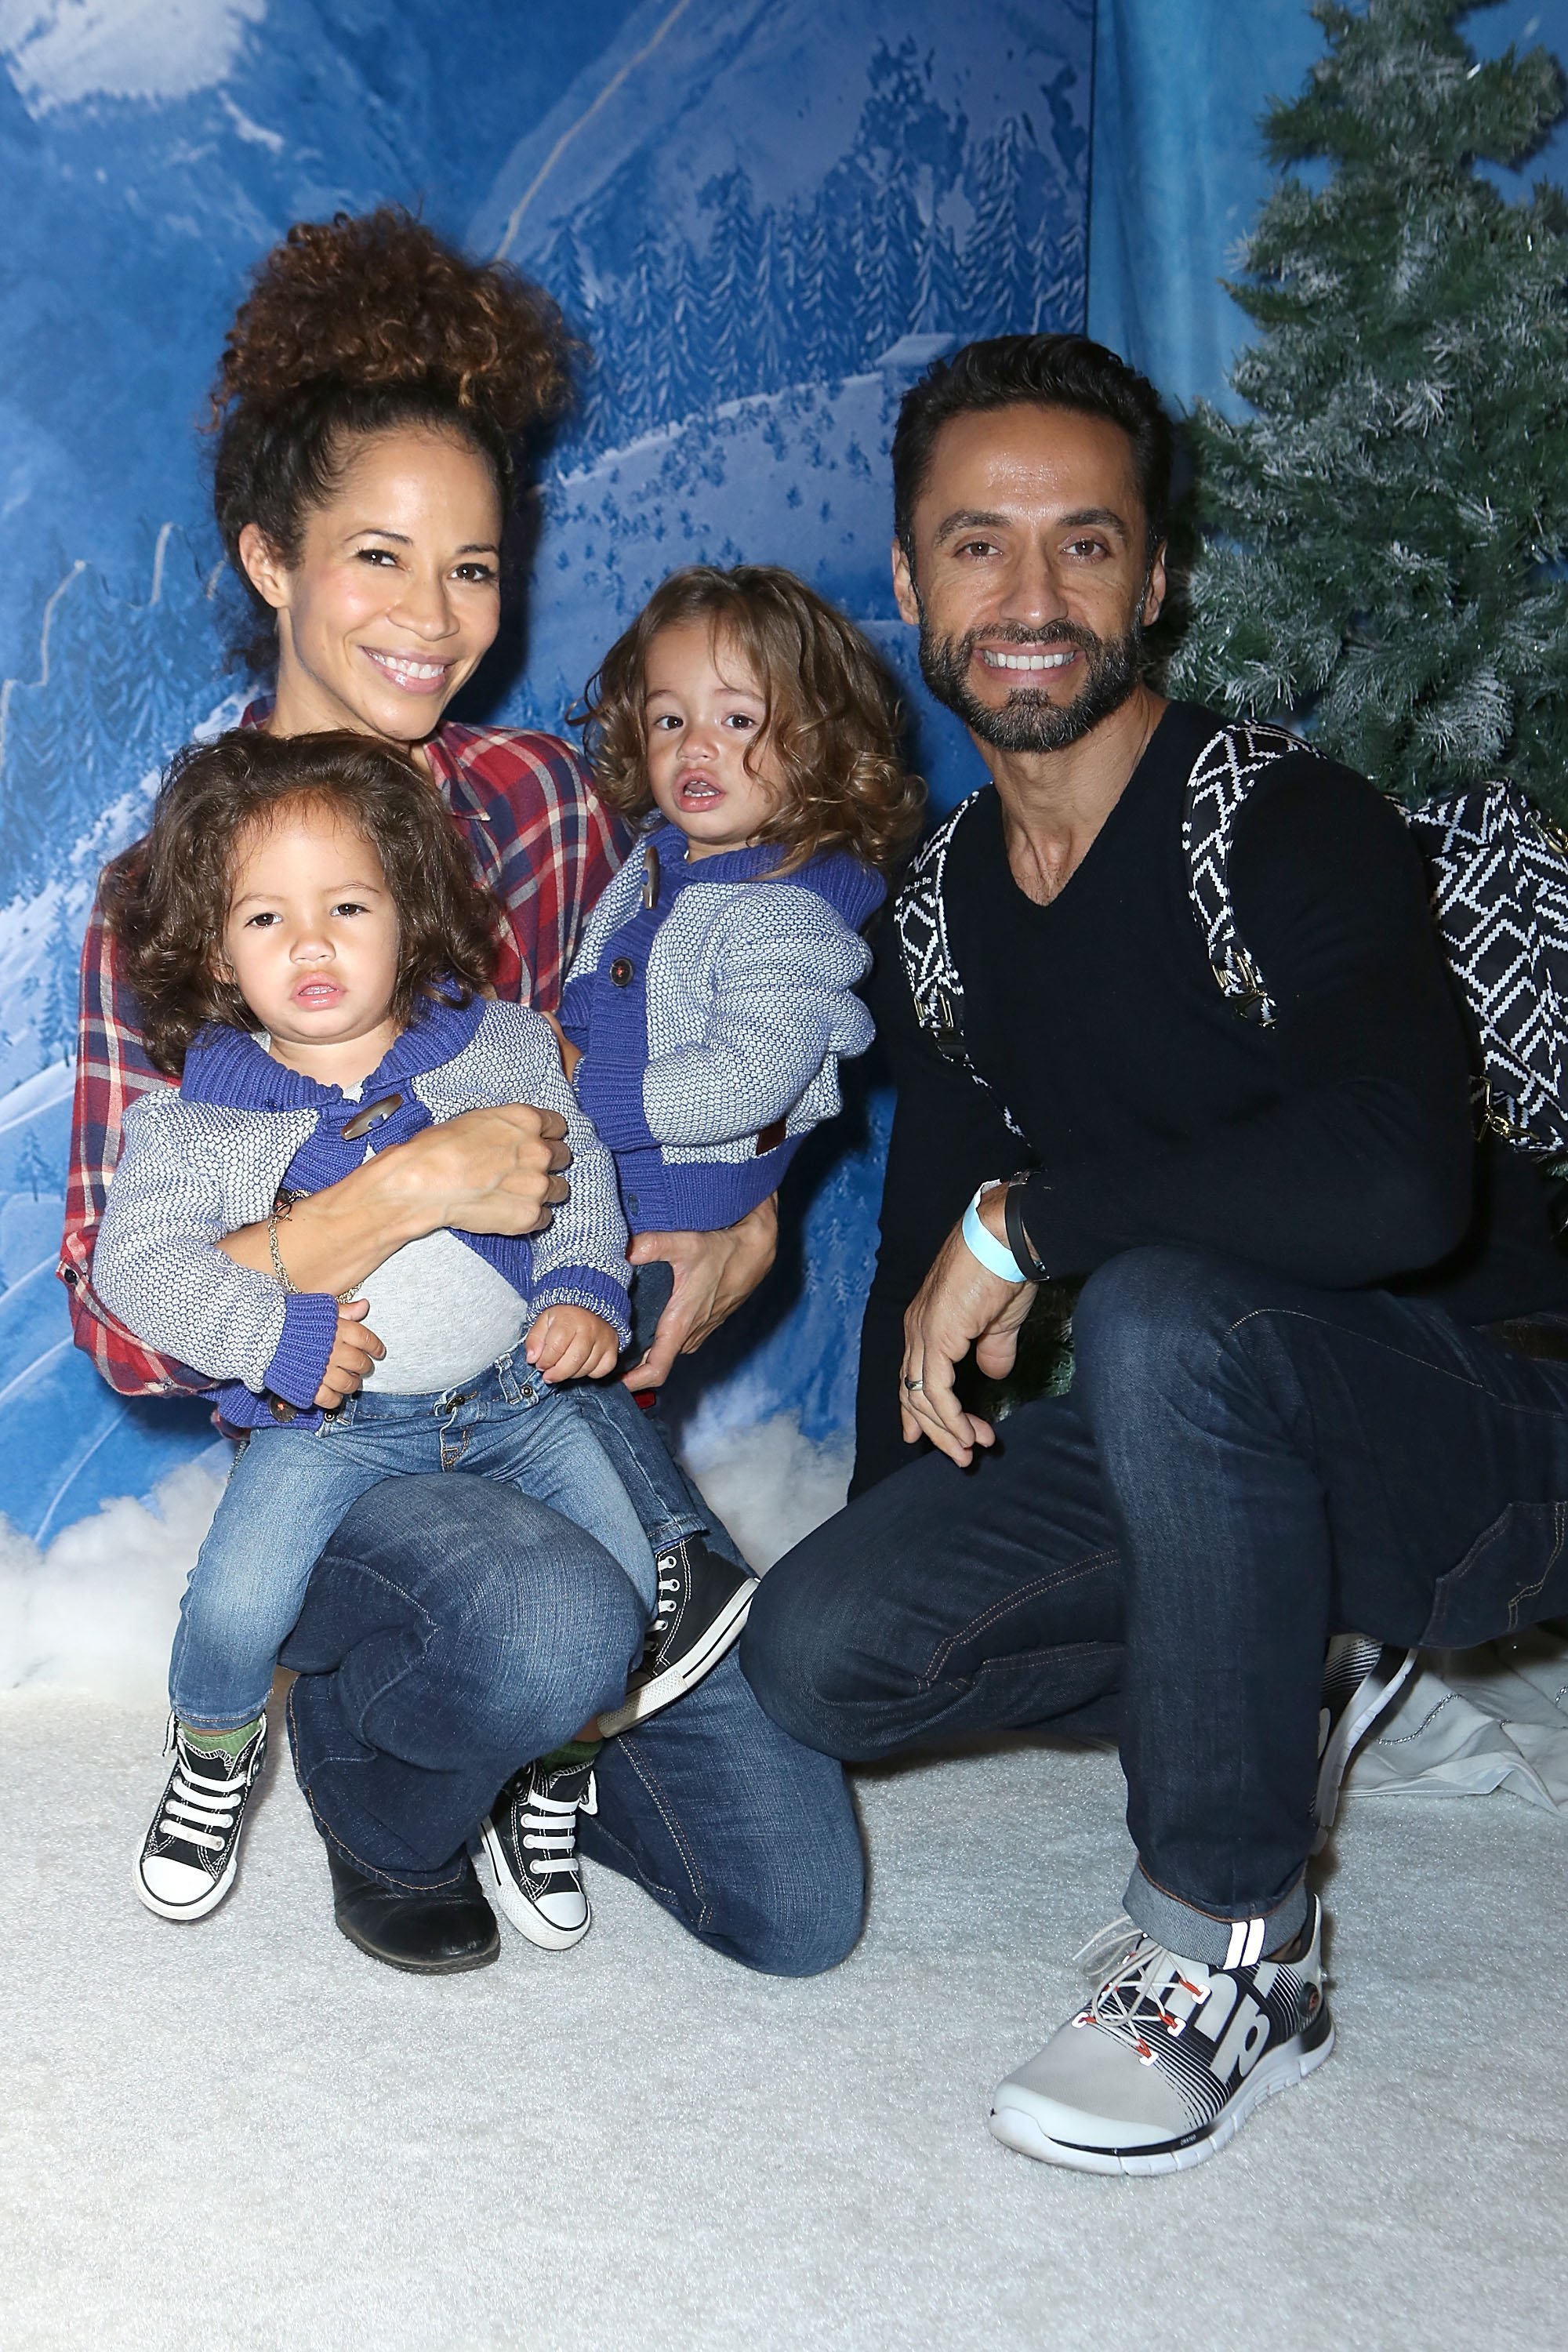 Sherri Saum, John, Michael, and Kamar De Los Reyes attend Disney On Ice Presents Frozen Los Angeles Premiere at Staples Center on December 10, 2015, in Los Angeles, California. | Source: Getty Images.